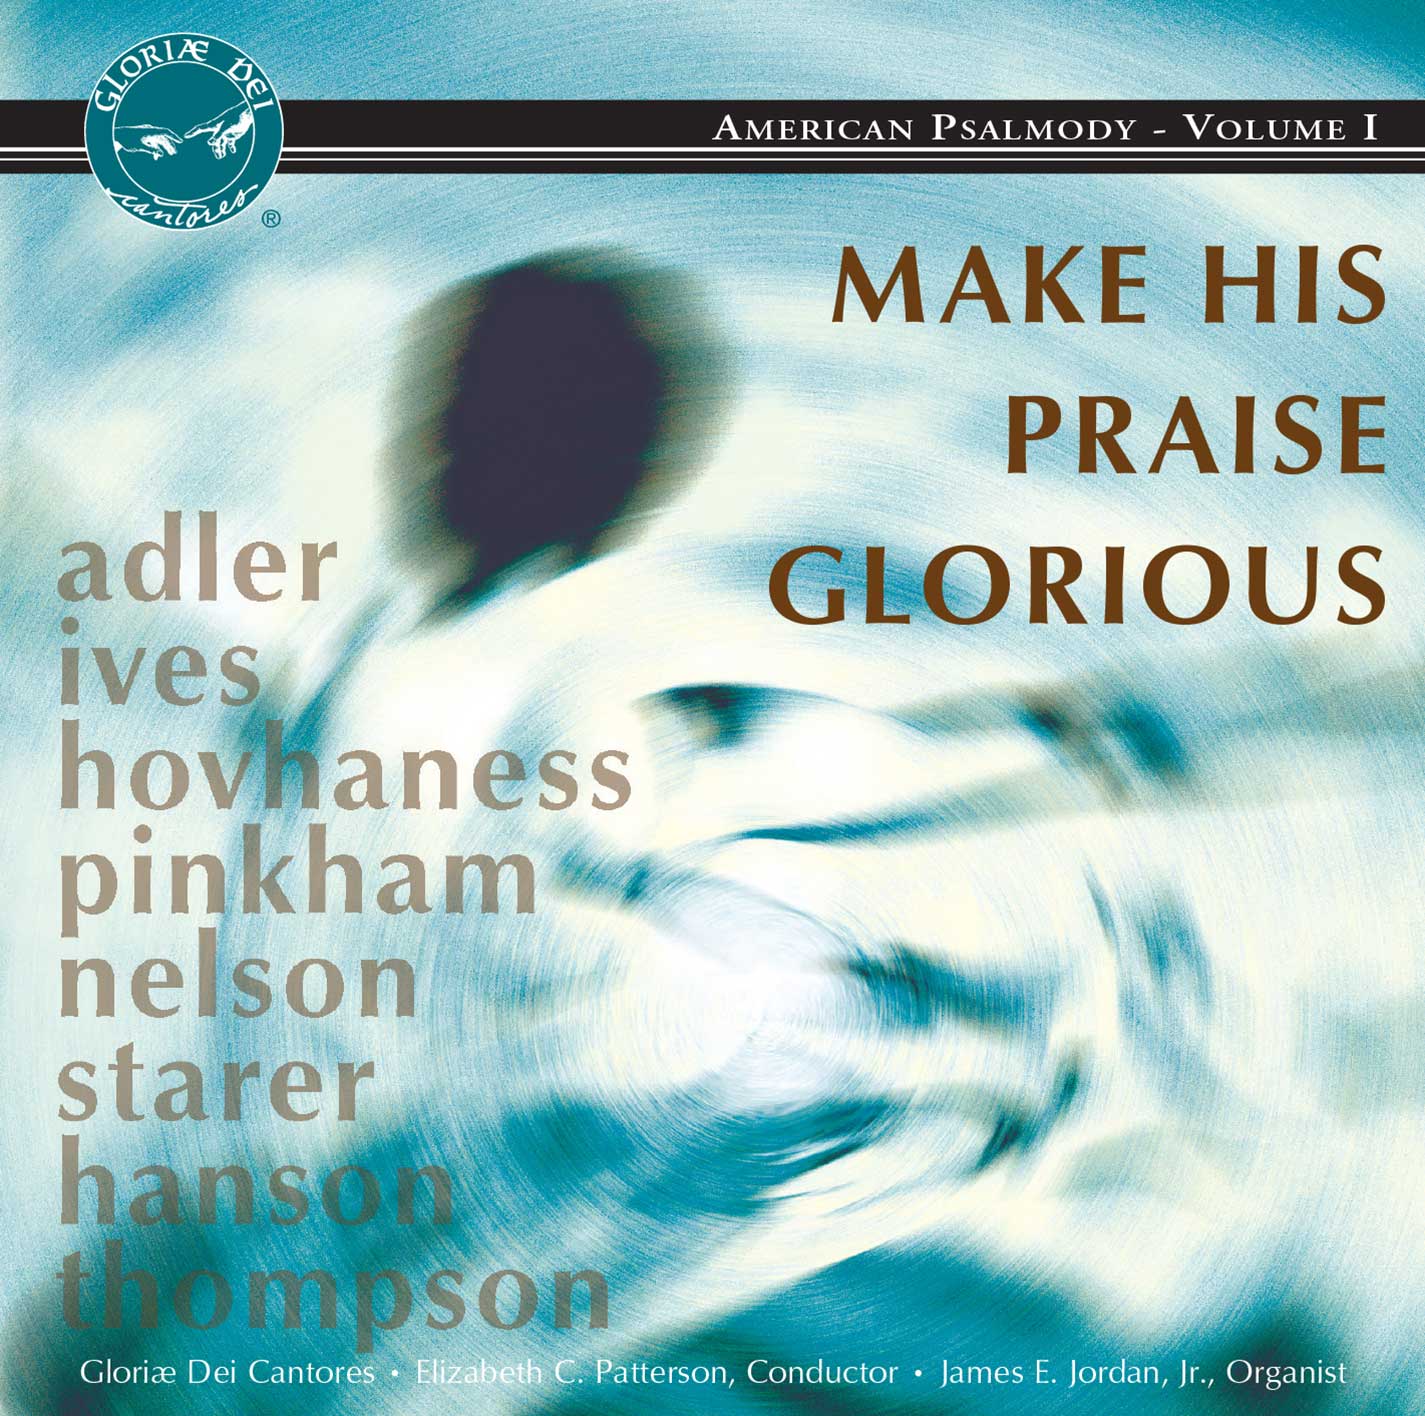 product image of 'Make His Praise Glorious' Gloriae Dei Cantores choral recording